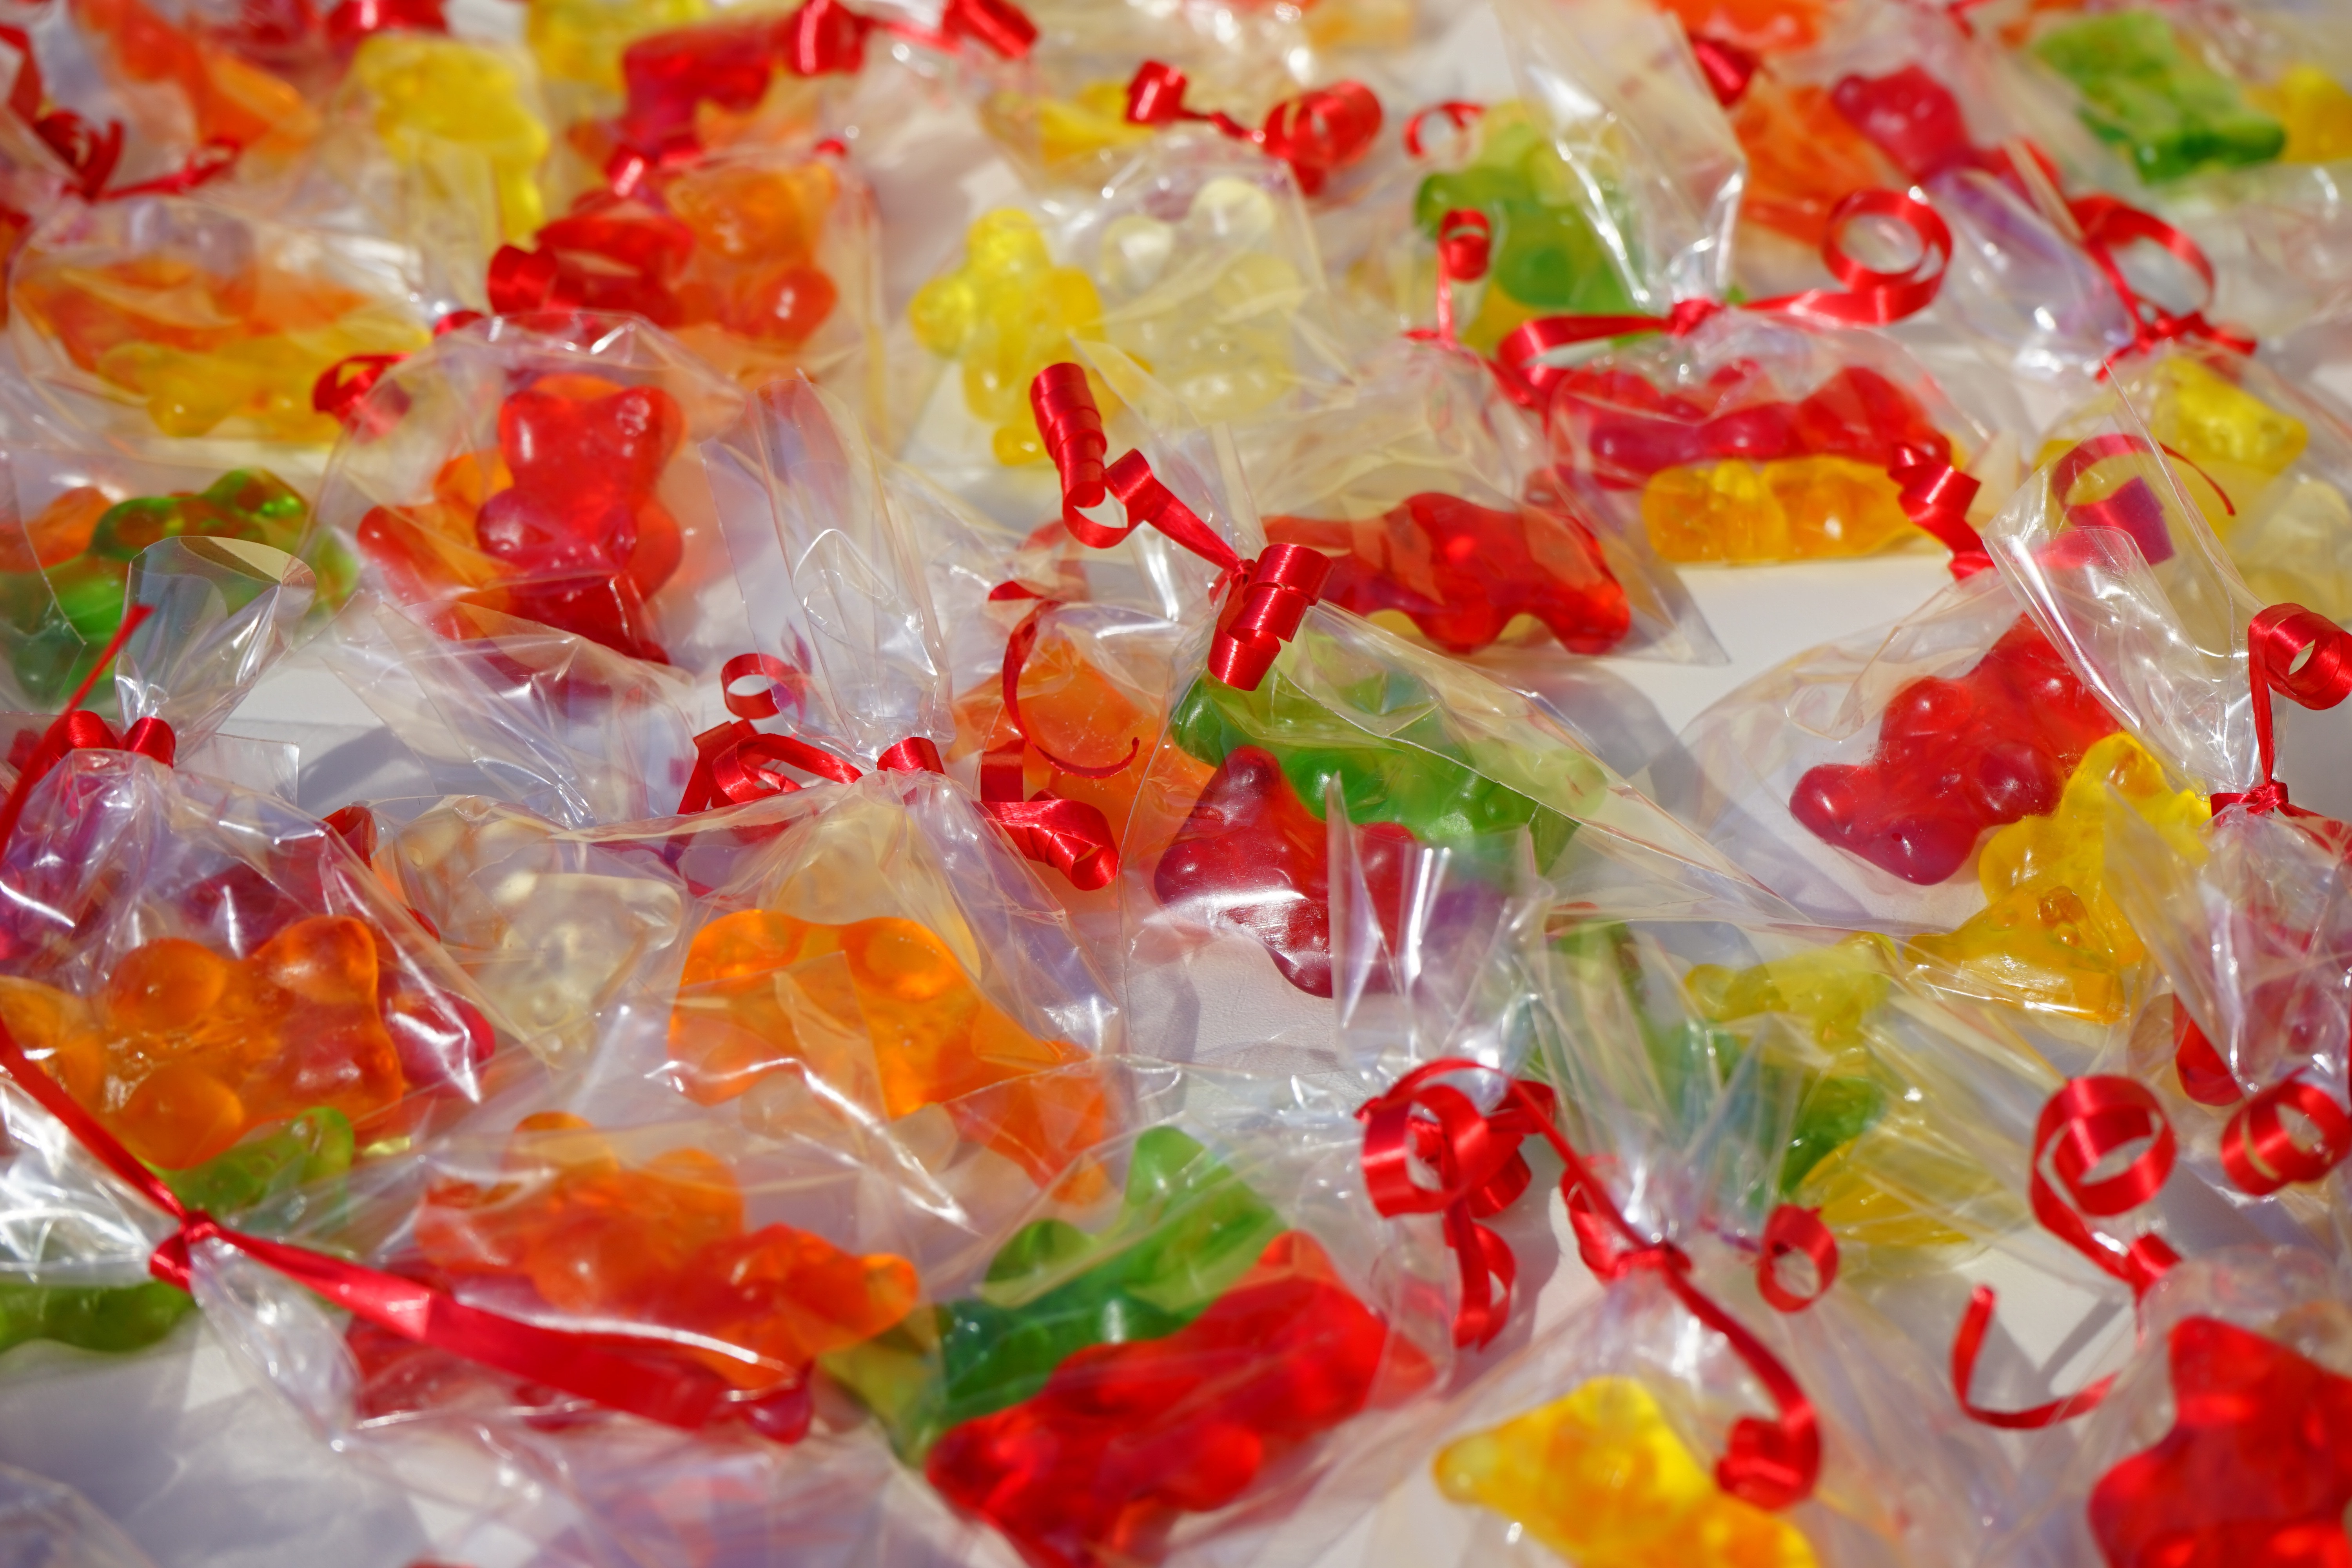 Sachets, Gummi Bears, Packed, backgrounds, food and drink